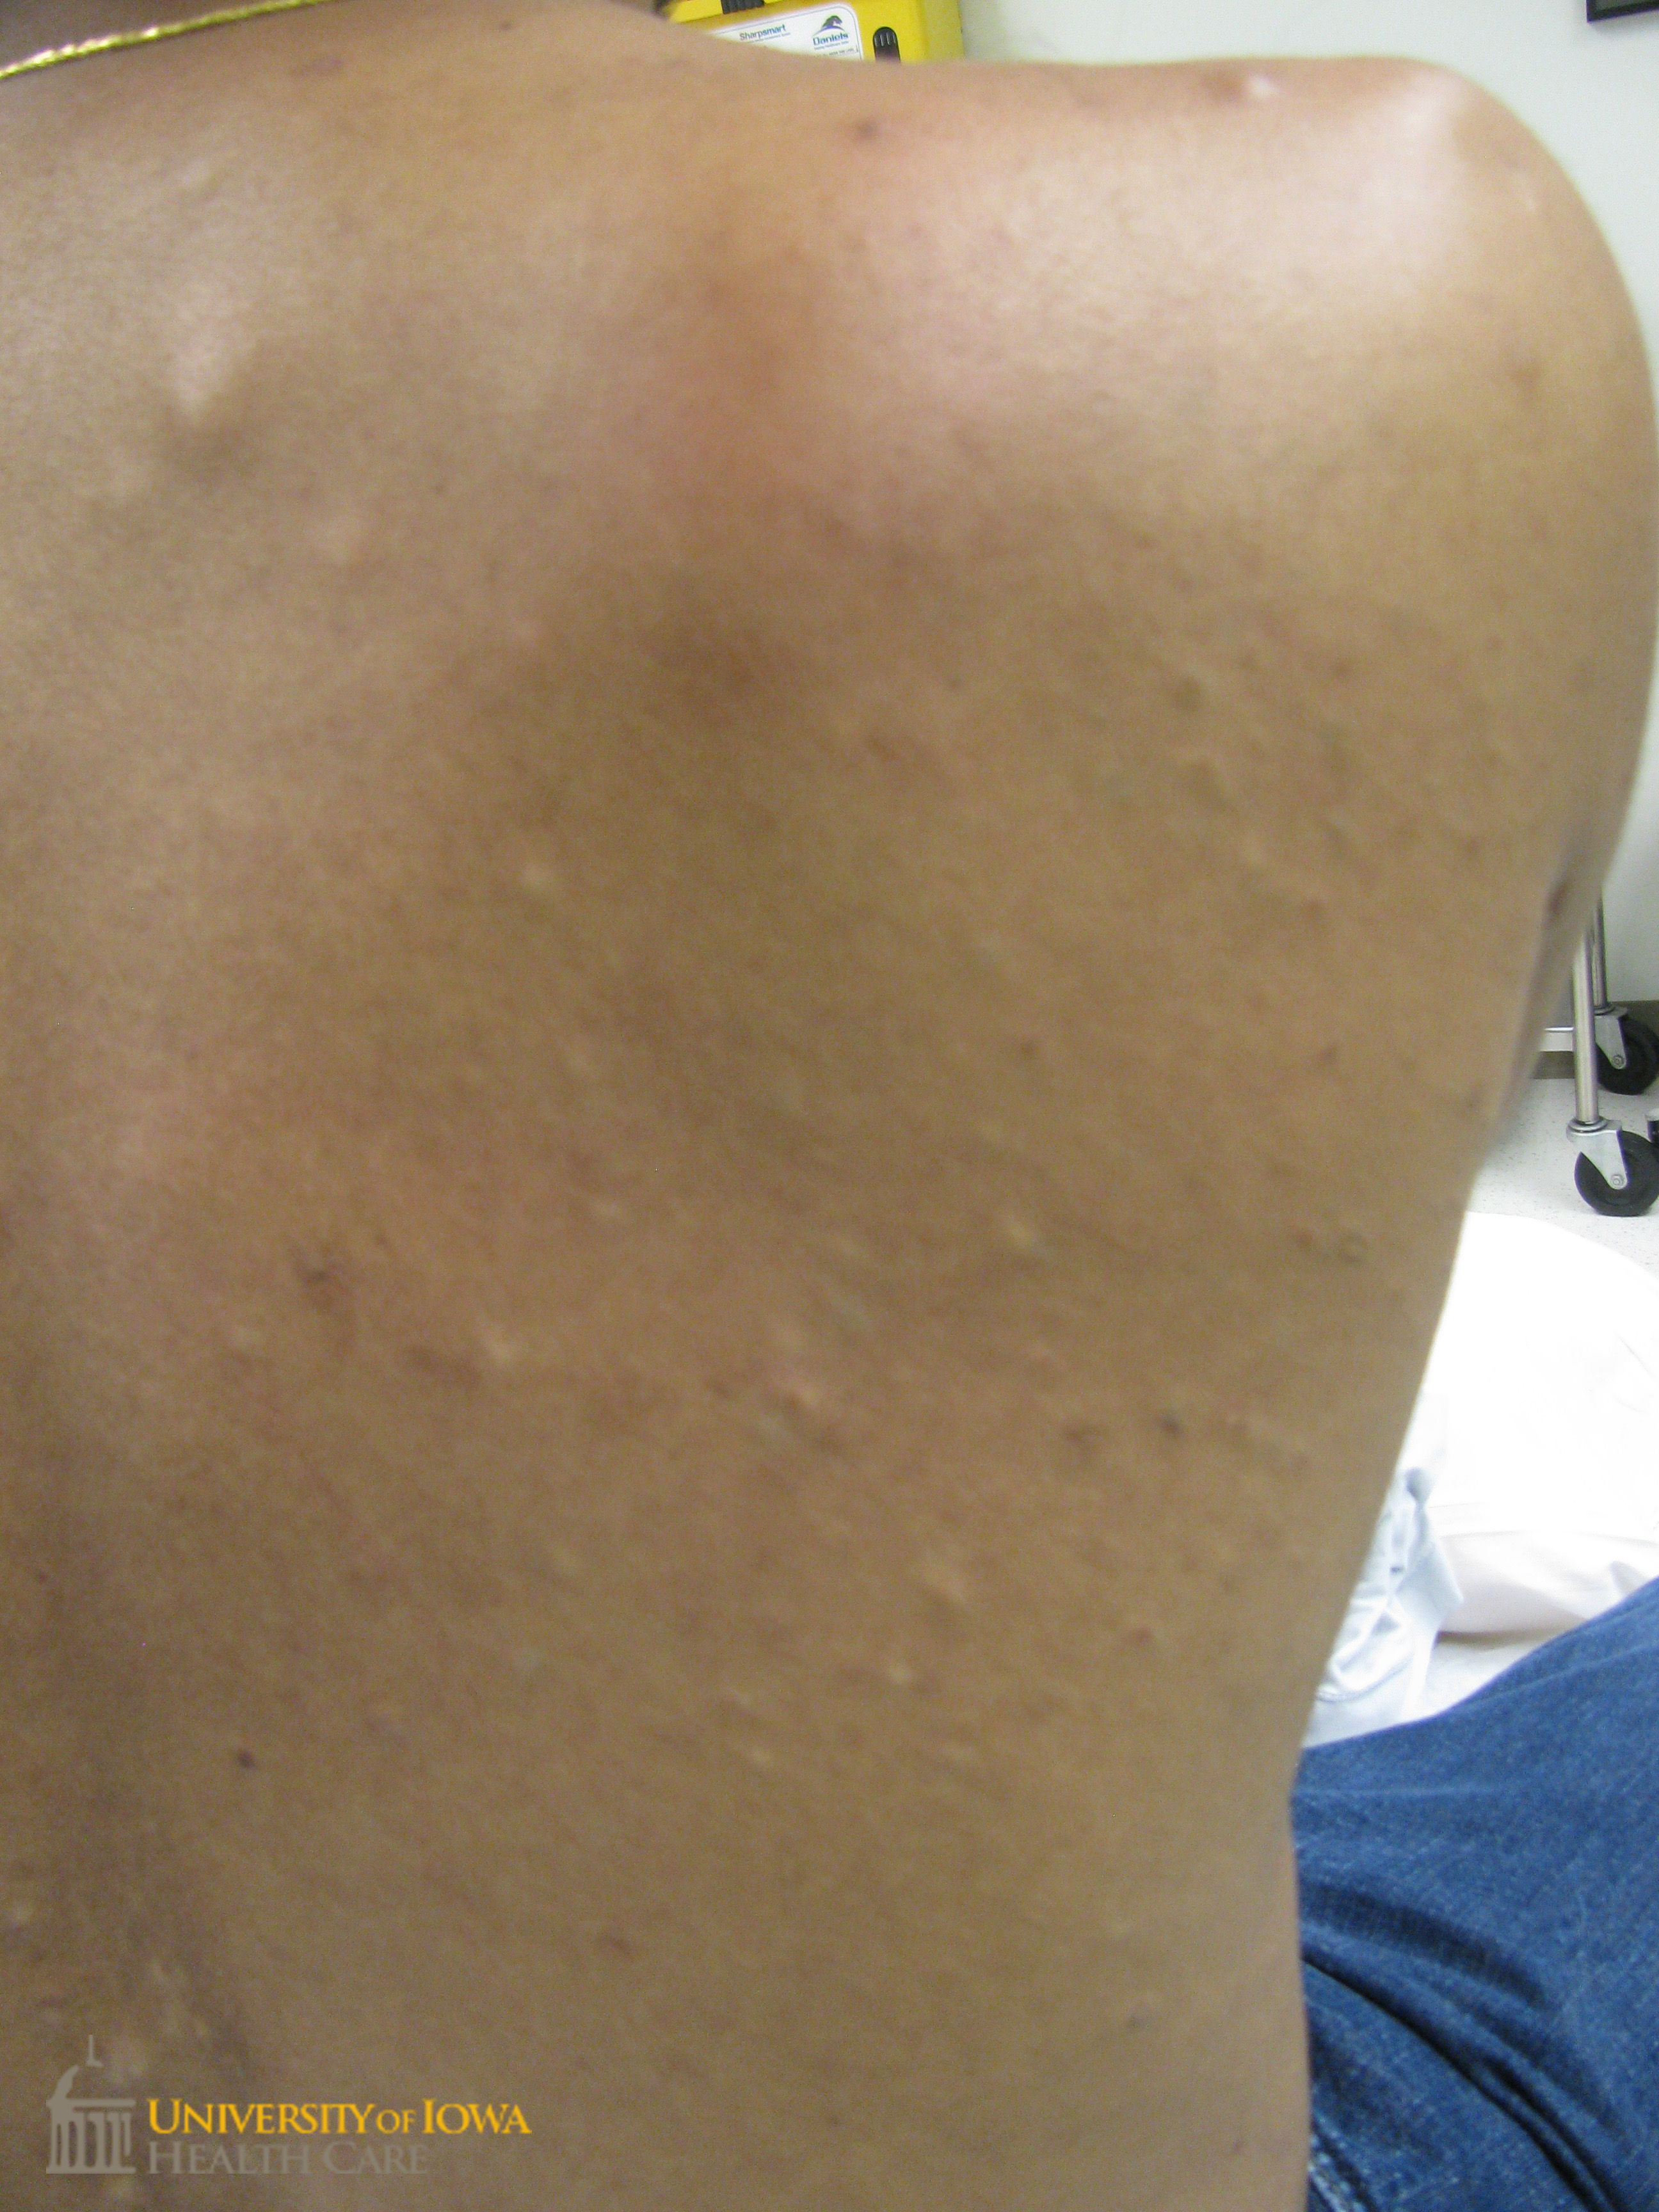 Multiple gray and yellow papules on the trunk. (click images for higher resolution).